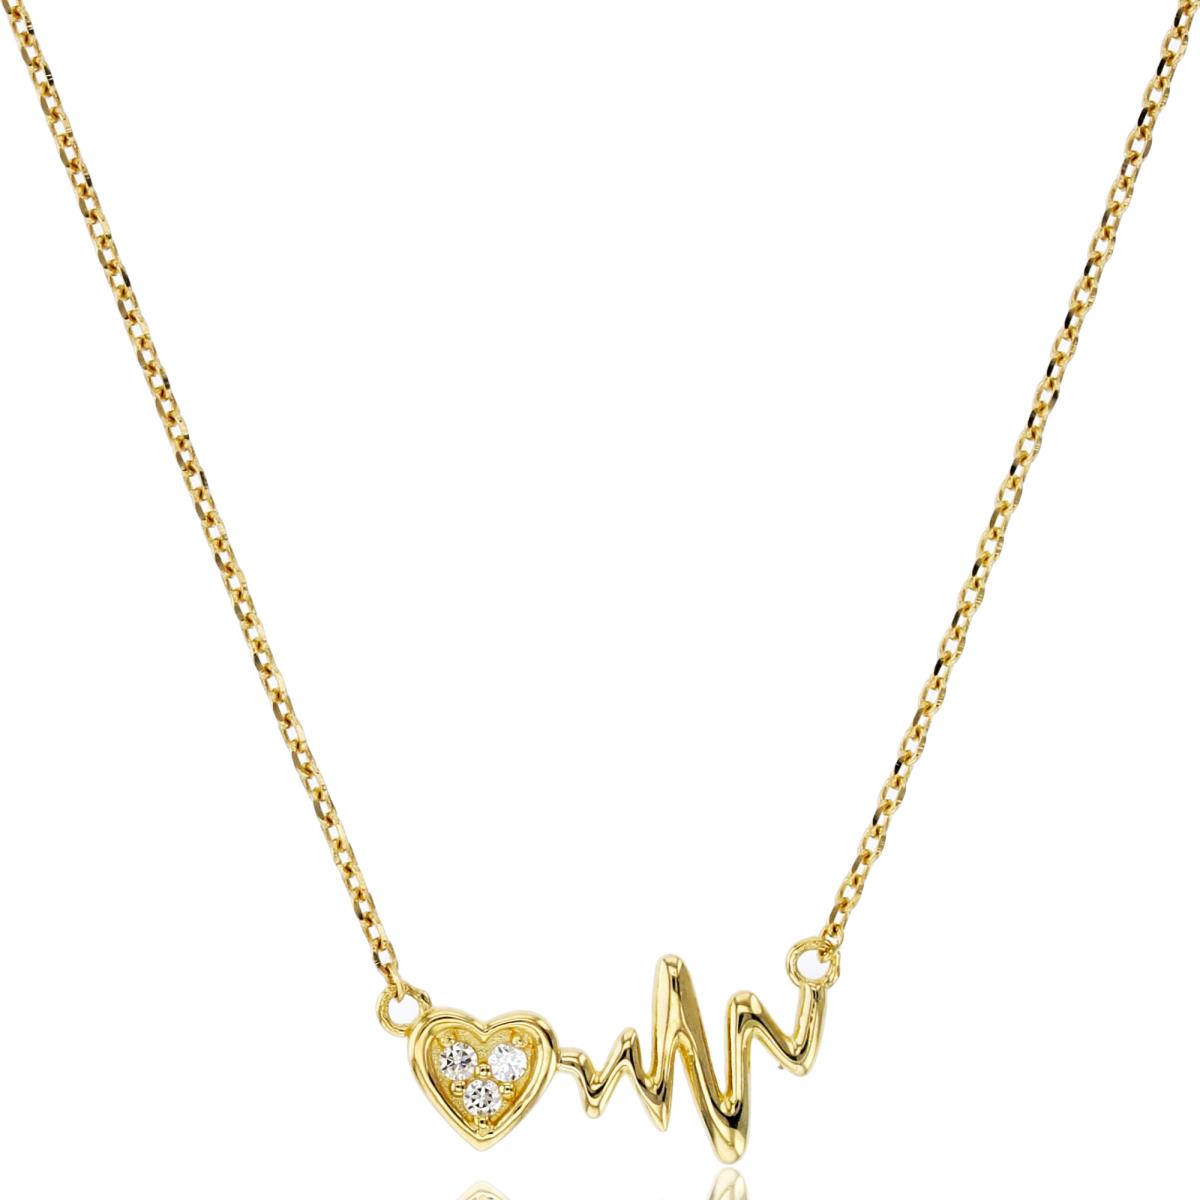 10K Yellow Gold Rnd CZ Pave Heart & Thunder 16"+2"Necklace